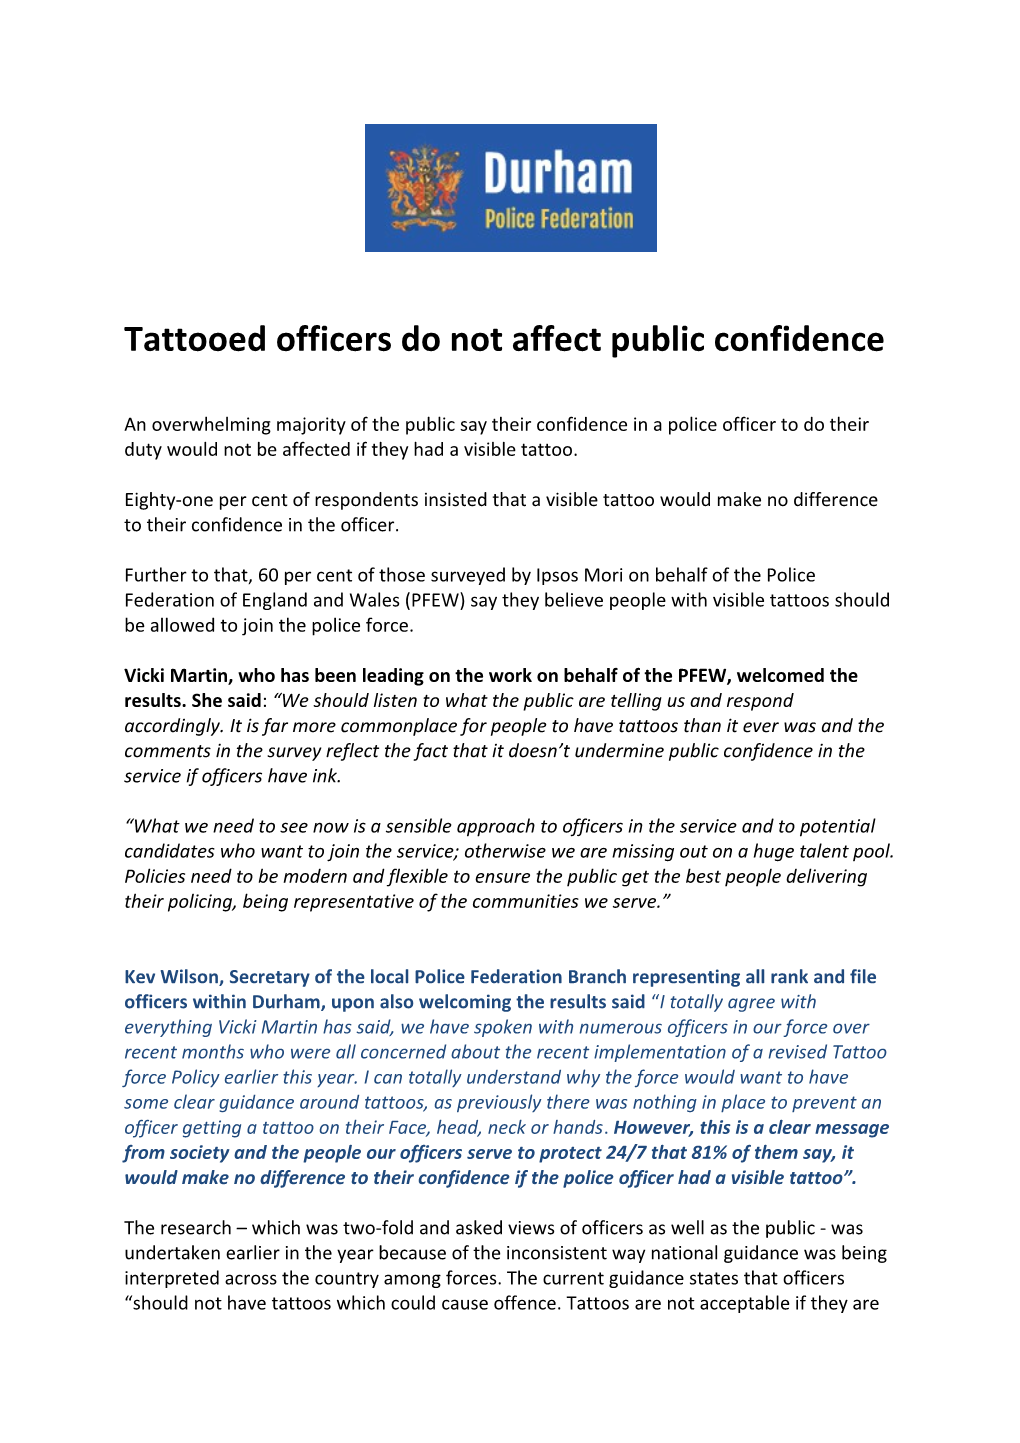 Tattooed Officers Do Not Affect Public Confidence